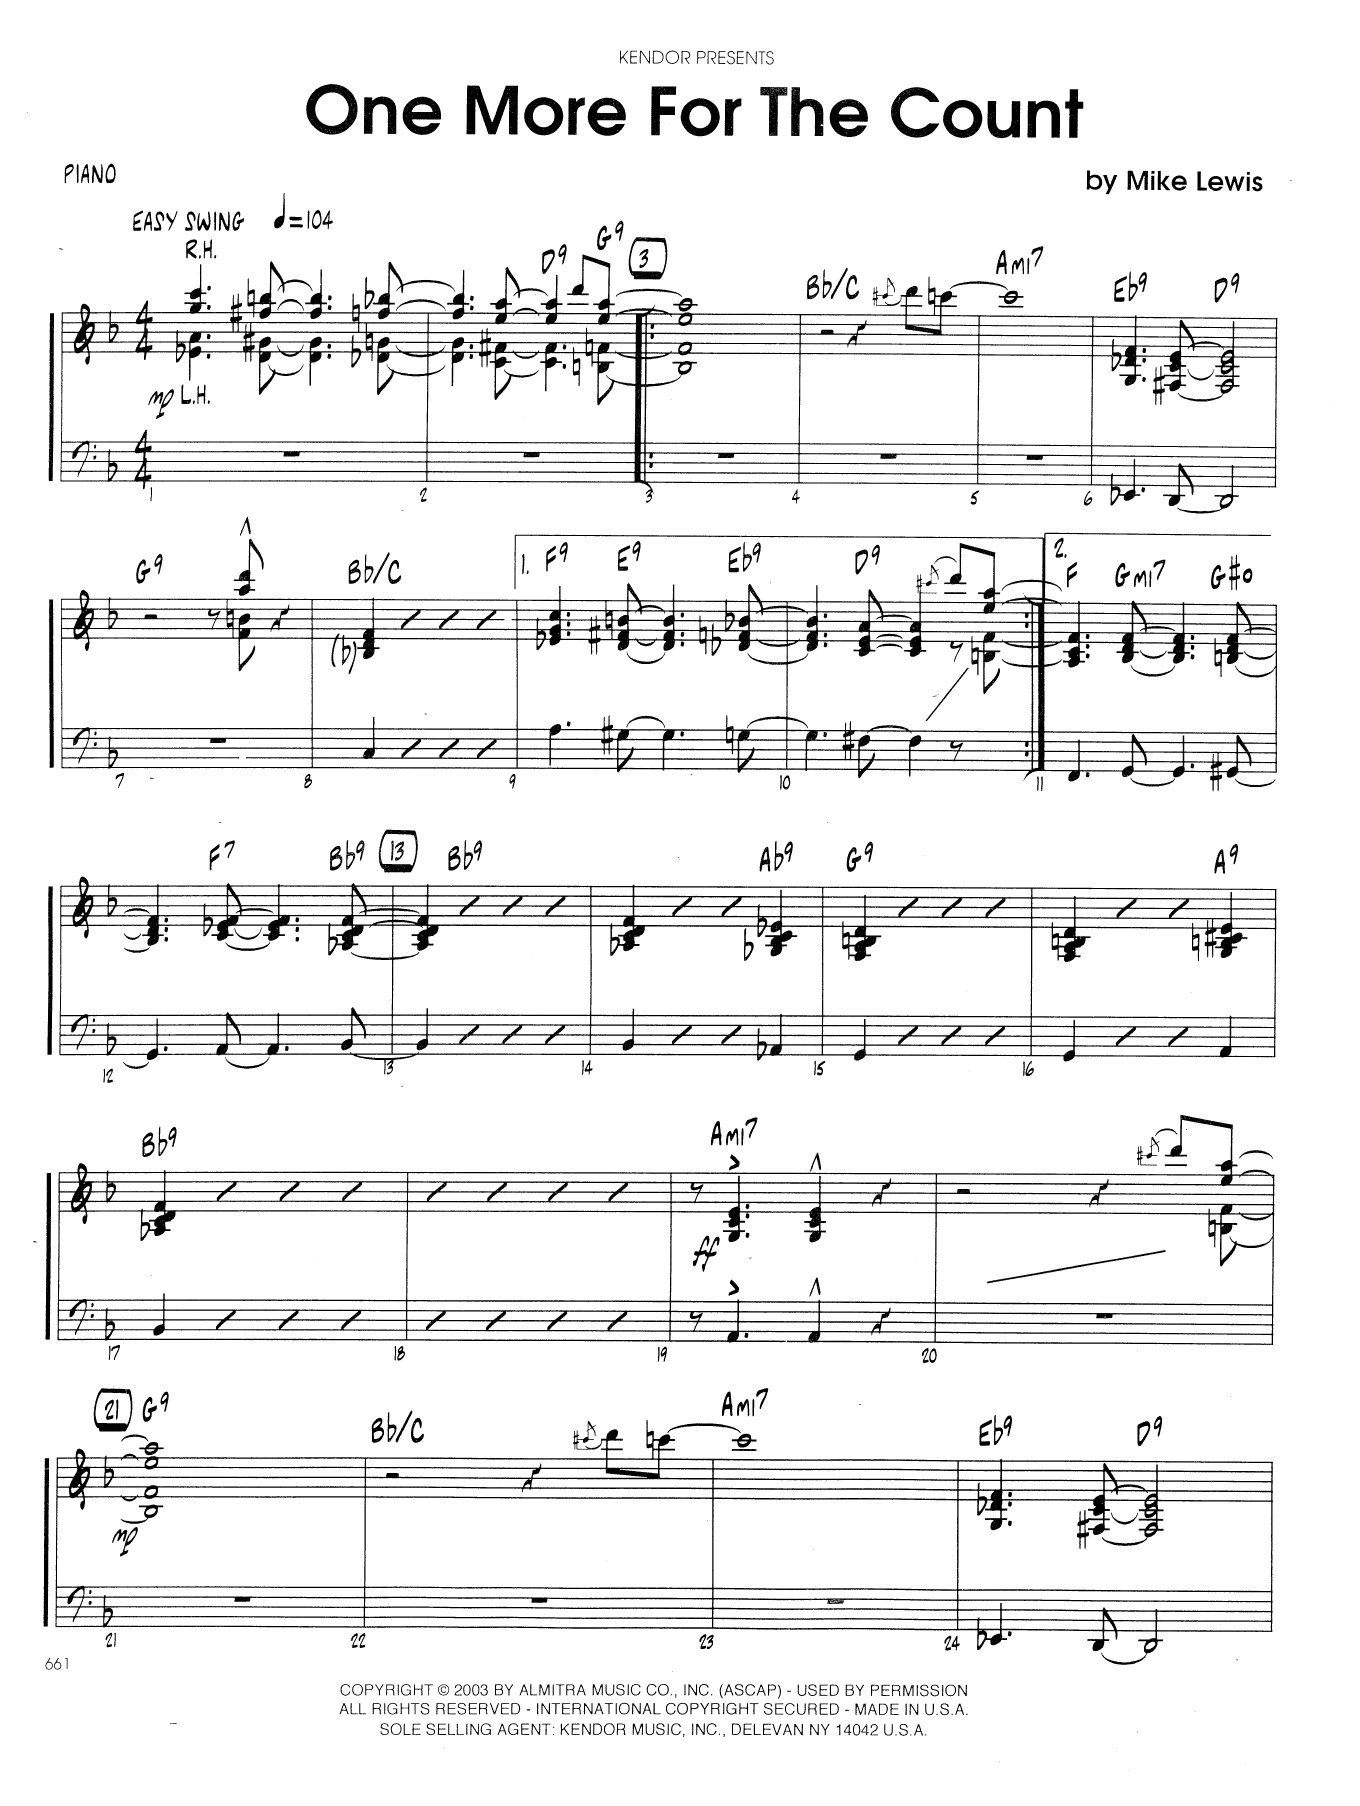 Download Mike Lewis One More For The Count - Piano Sheet Music